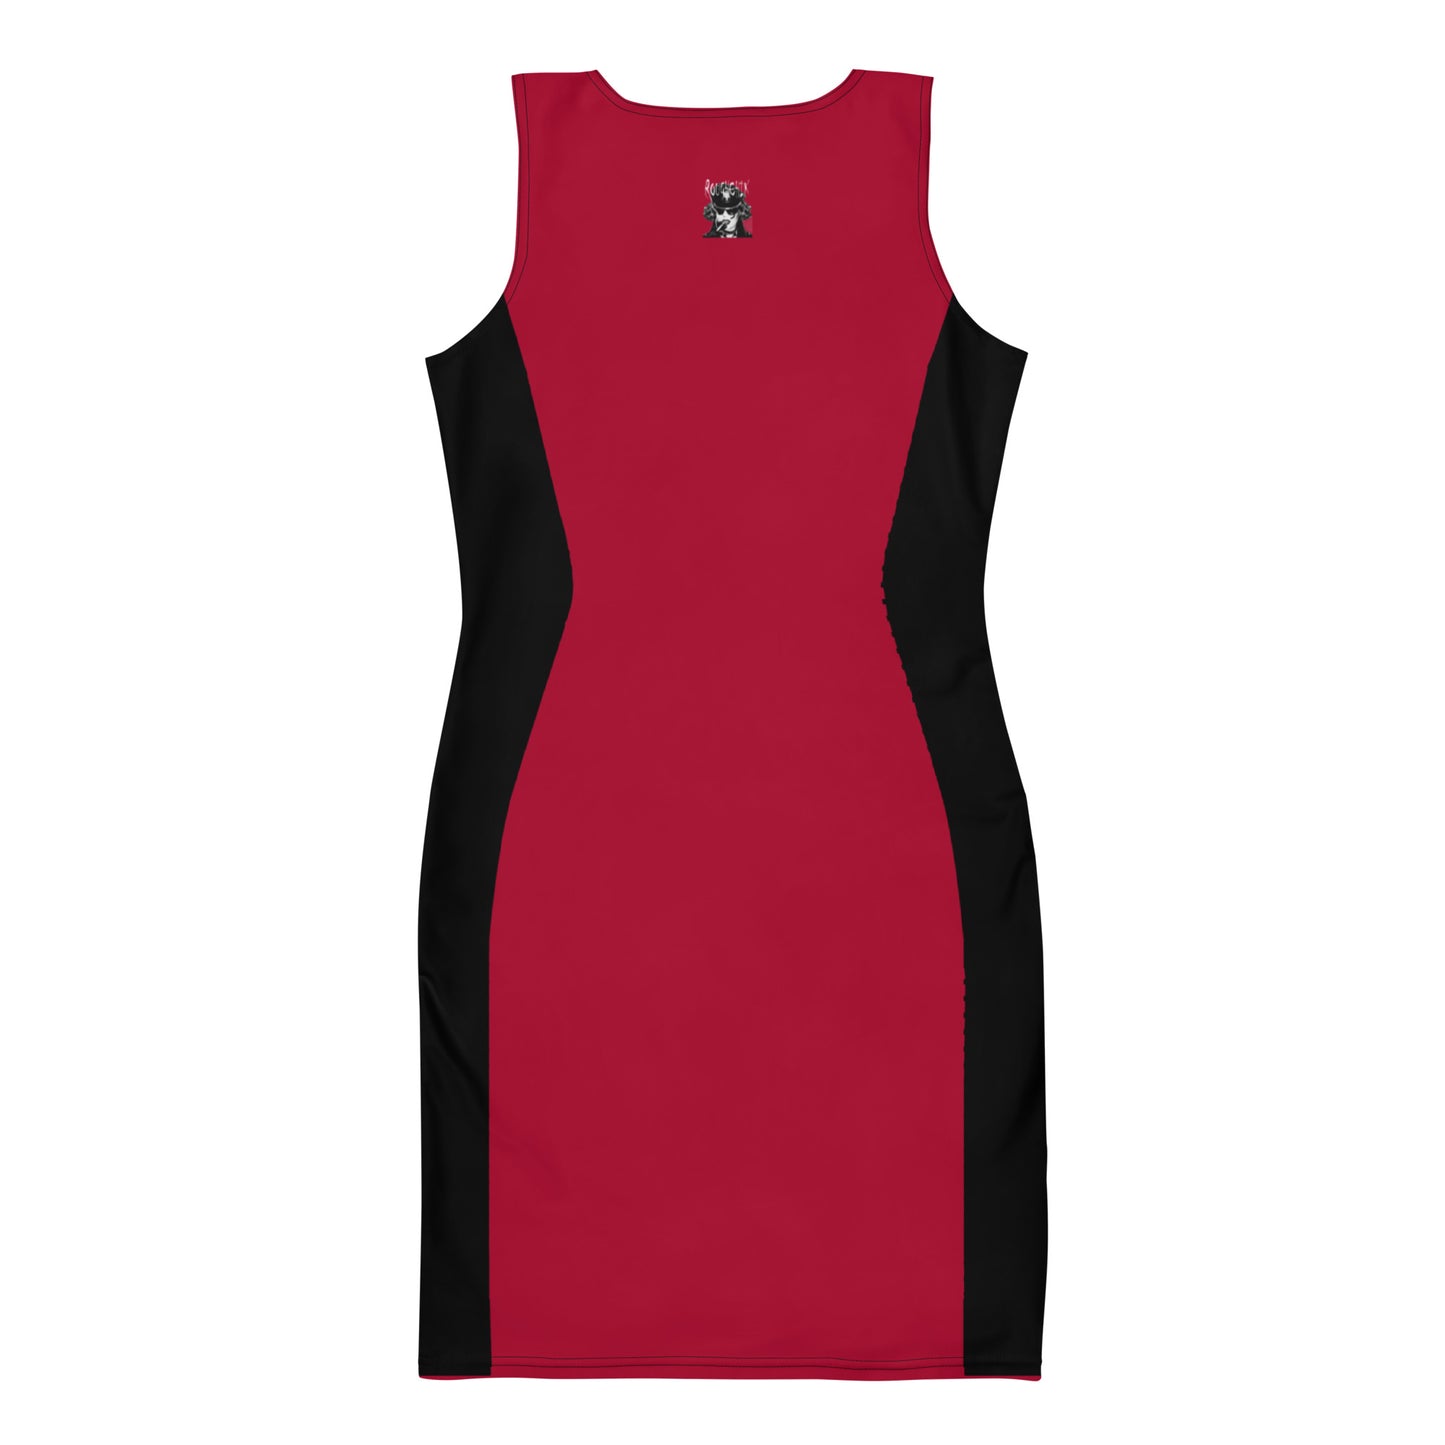 ROUGHCHIK SNATCHED Fitted Dress - Red